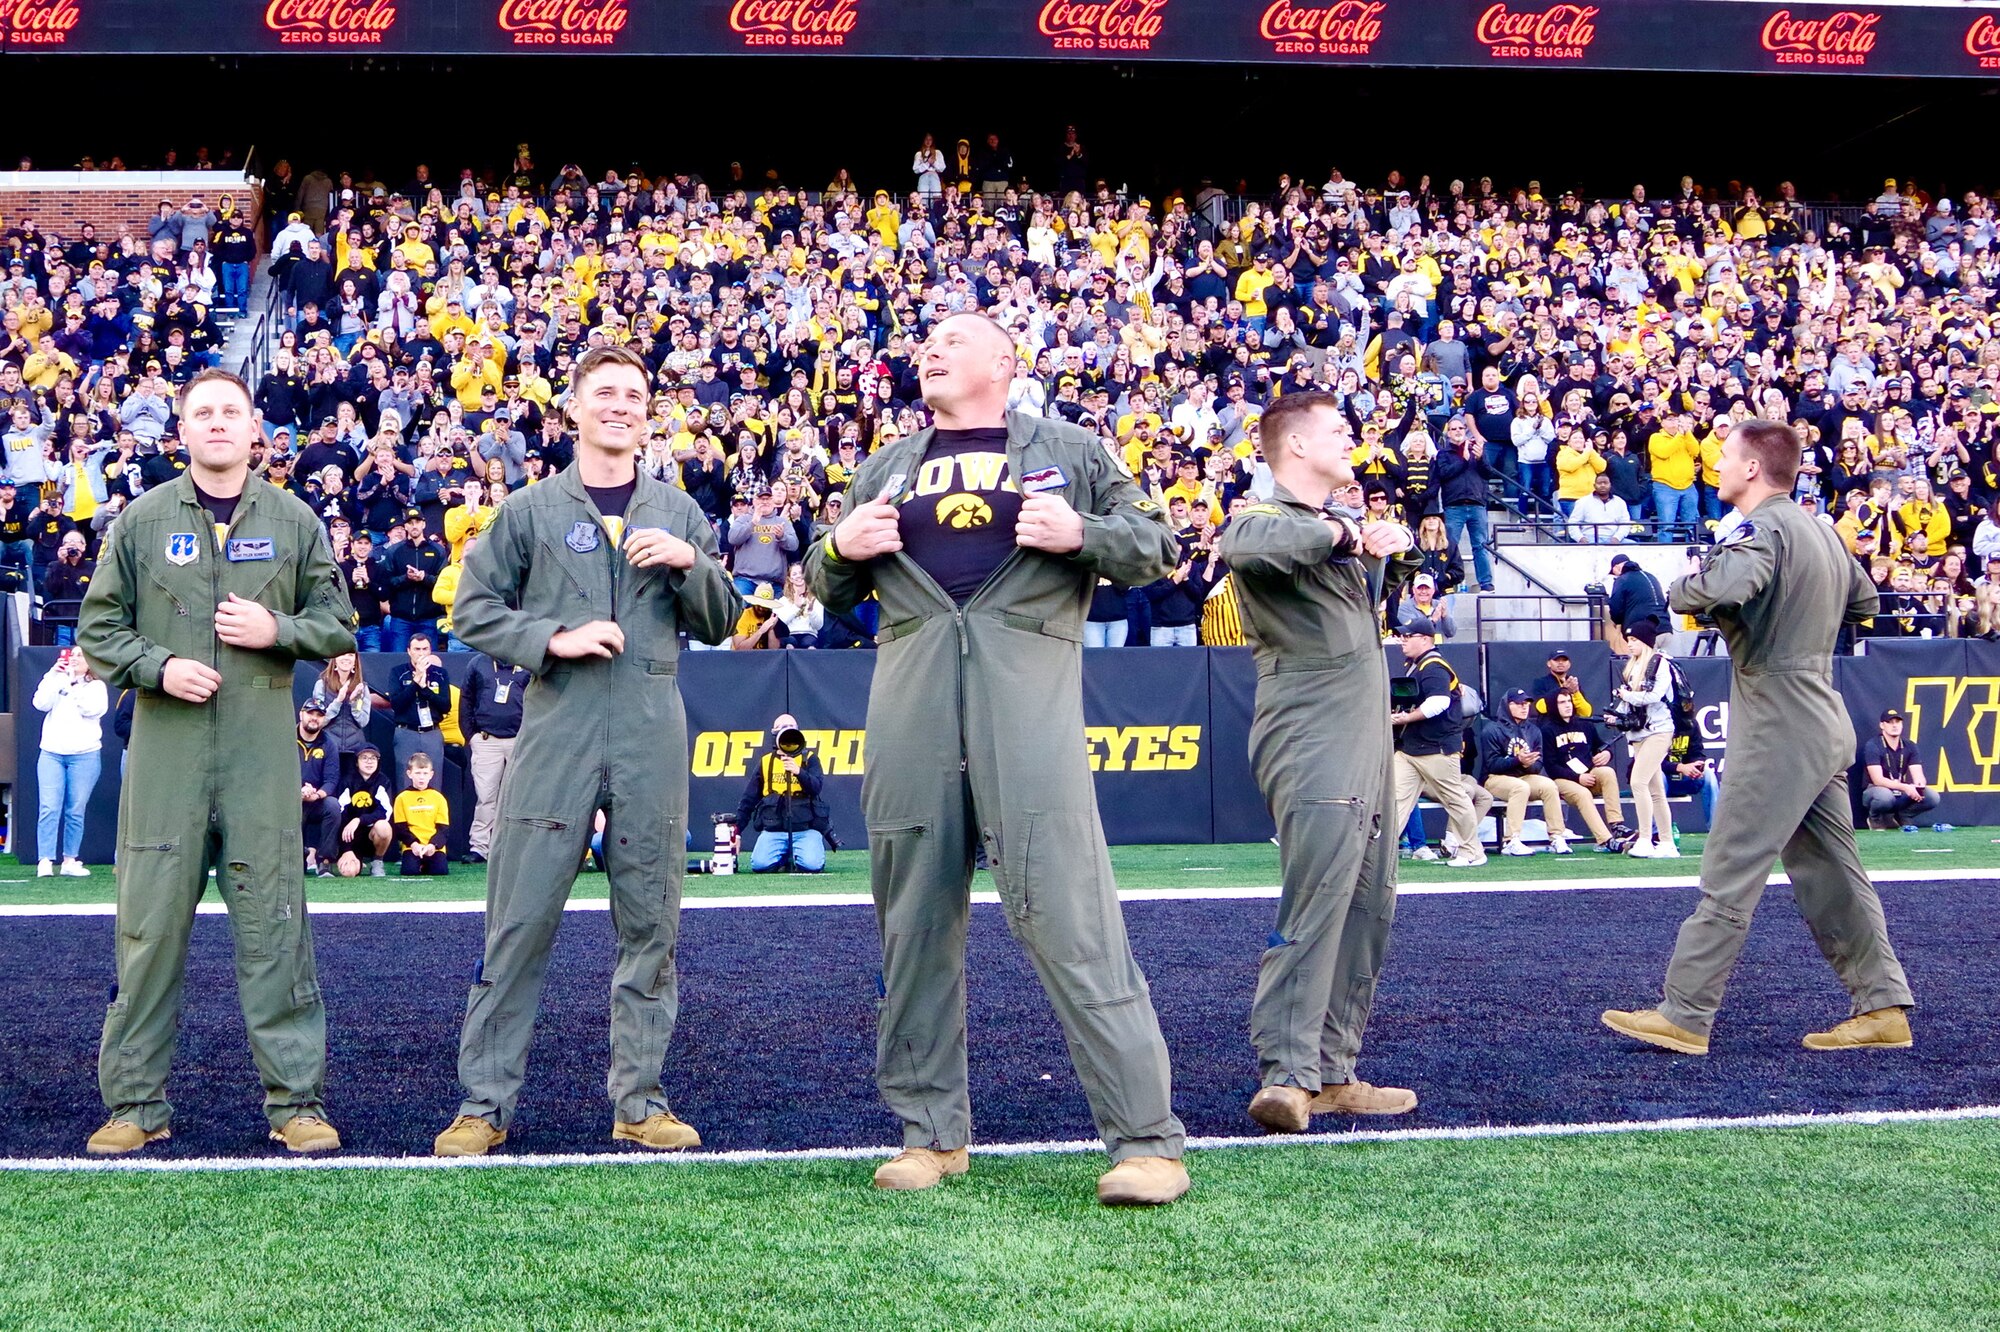 Aircrew from the 185th Air Refueling Wing are honored in the end zone at Kinnick Stadium in Iowa City, Iowa.